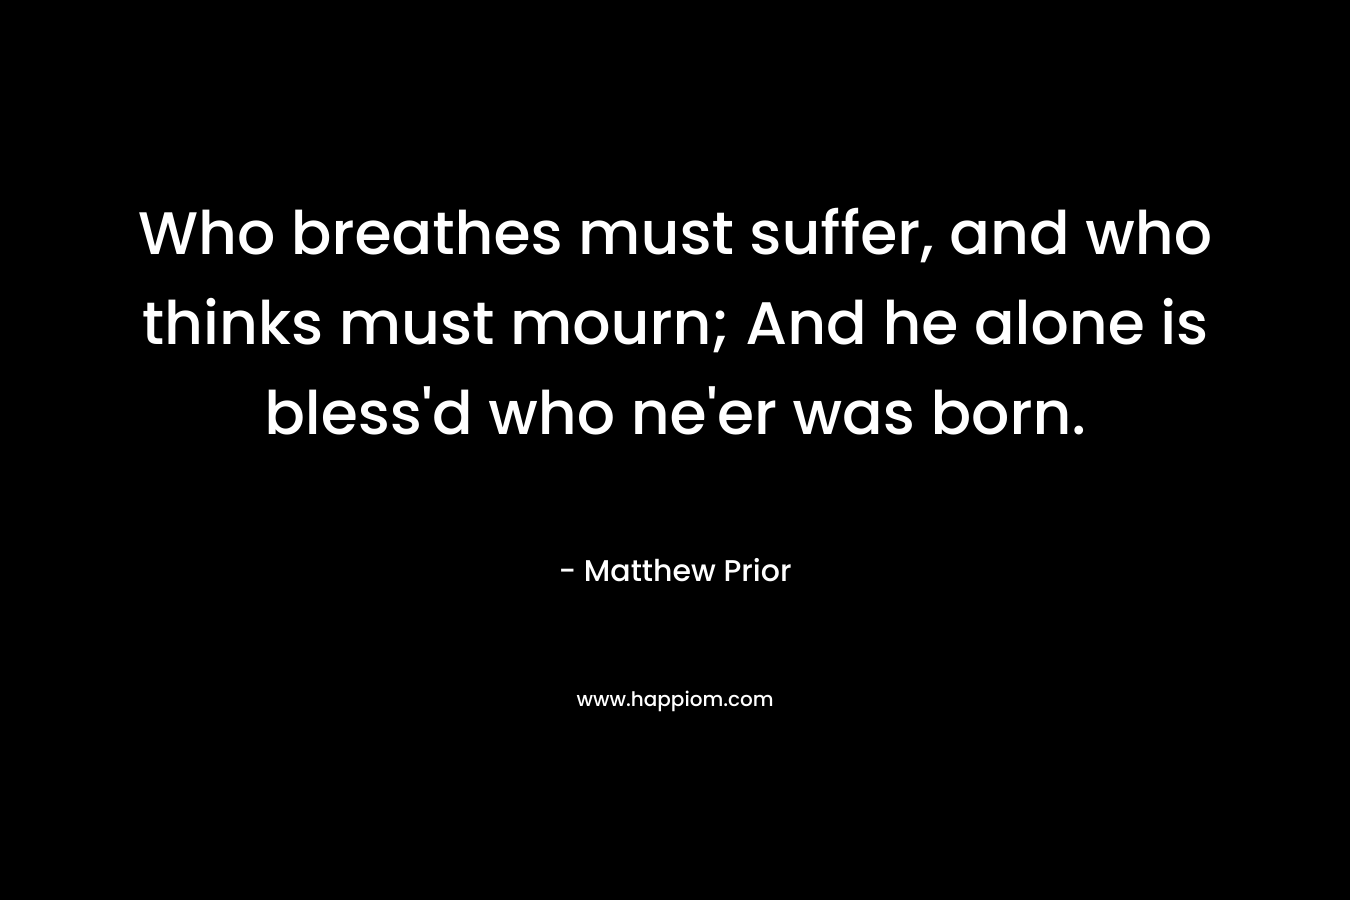 Who breathes must suffer, and who thinks must mourn; And he alone is bless'd who ne'er was born.